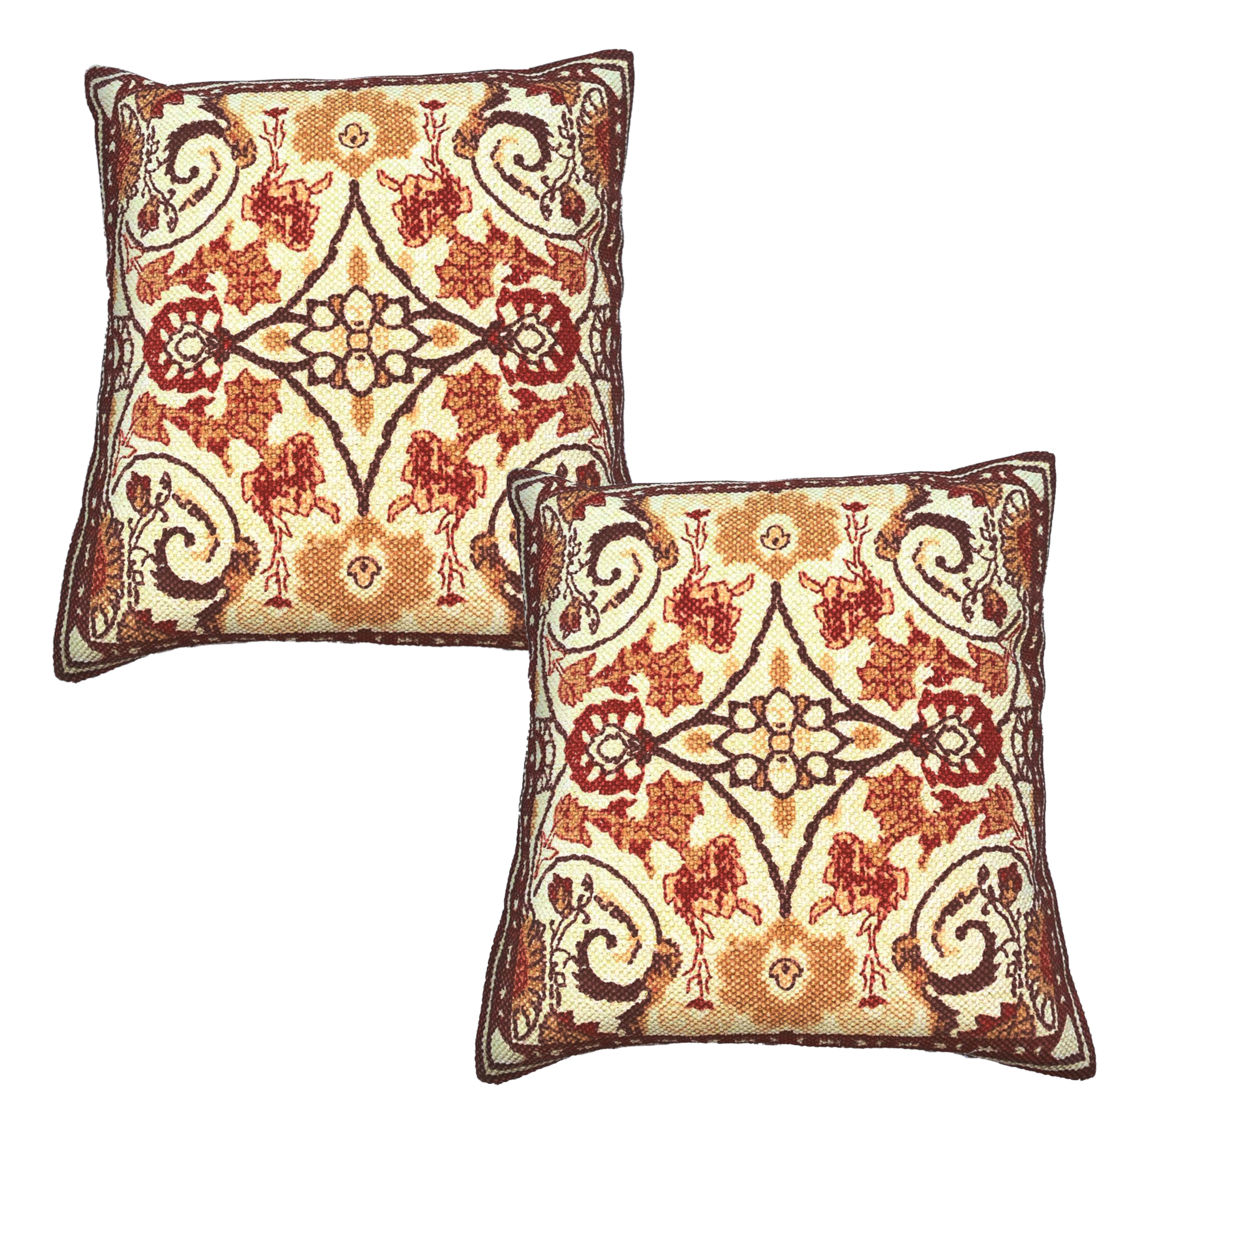 18 X 18 Square Cotton Accent Throw Pillows, Scrolled Floral Pattern, Set Of 2, Multicolor